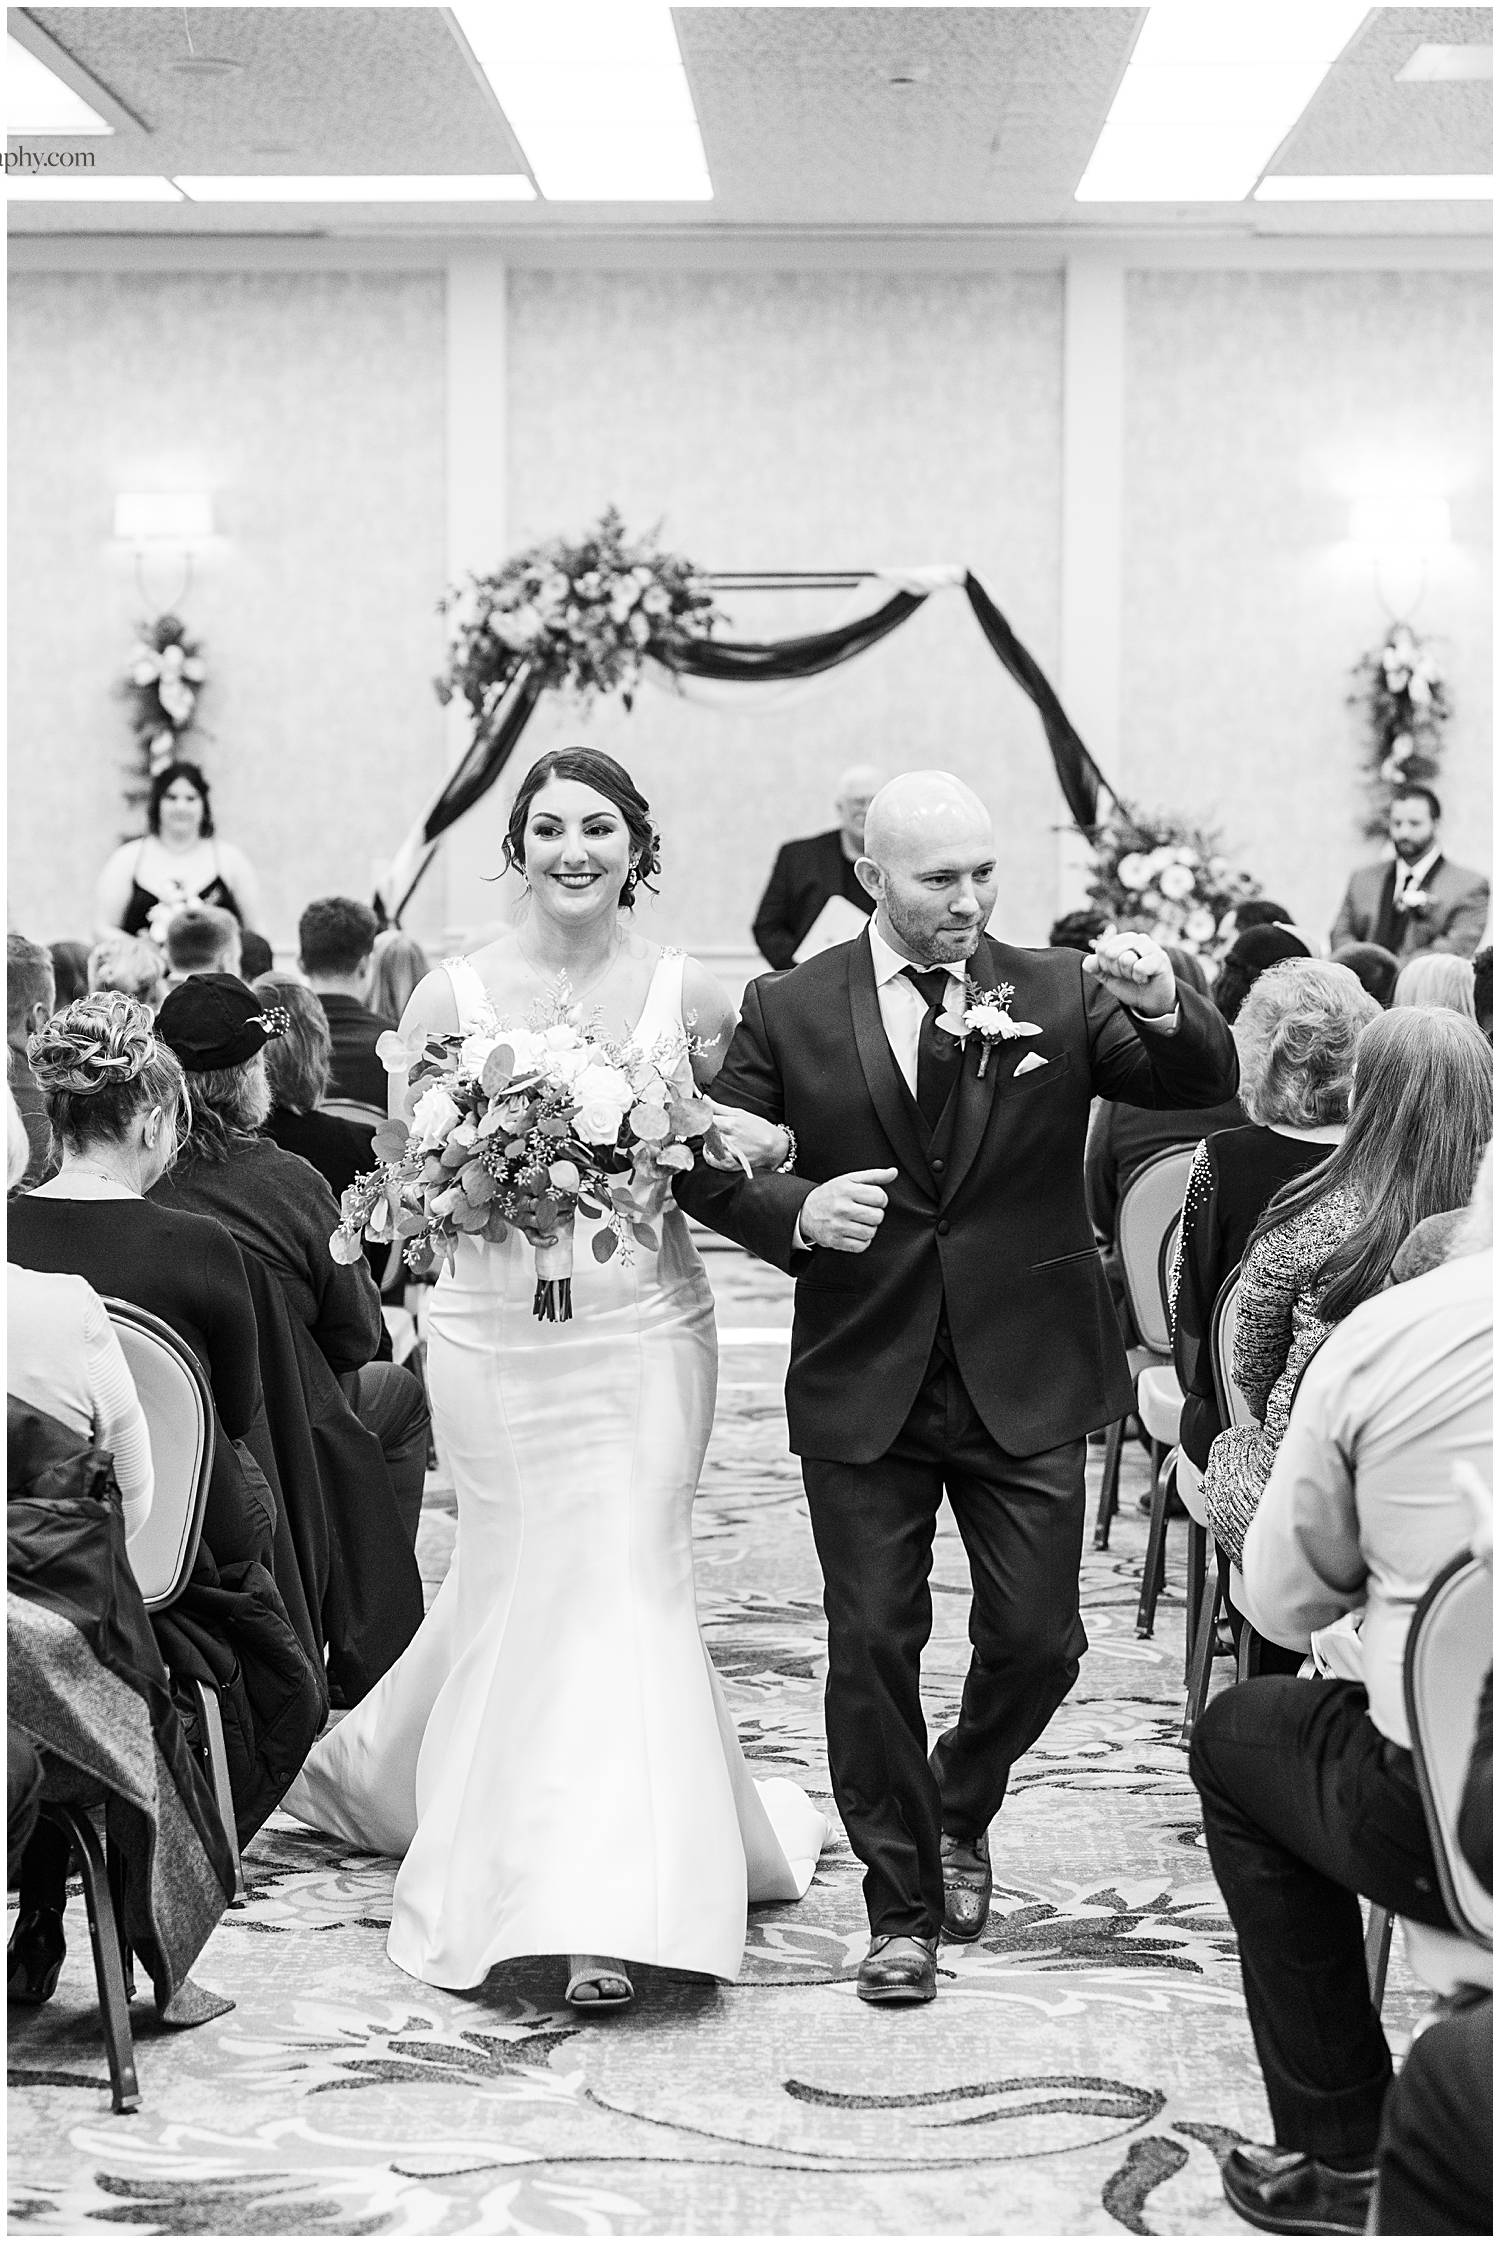 Black and white photo of couple walking down the aisle after wedding ceremony.